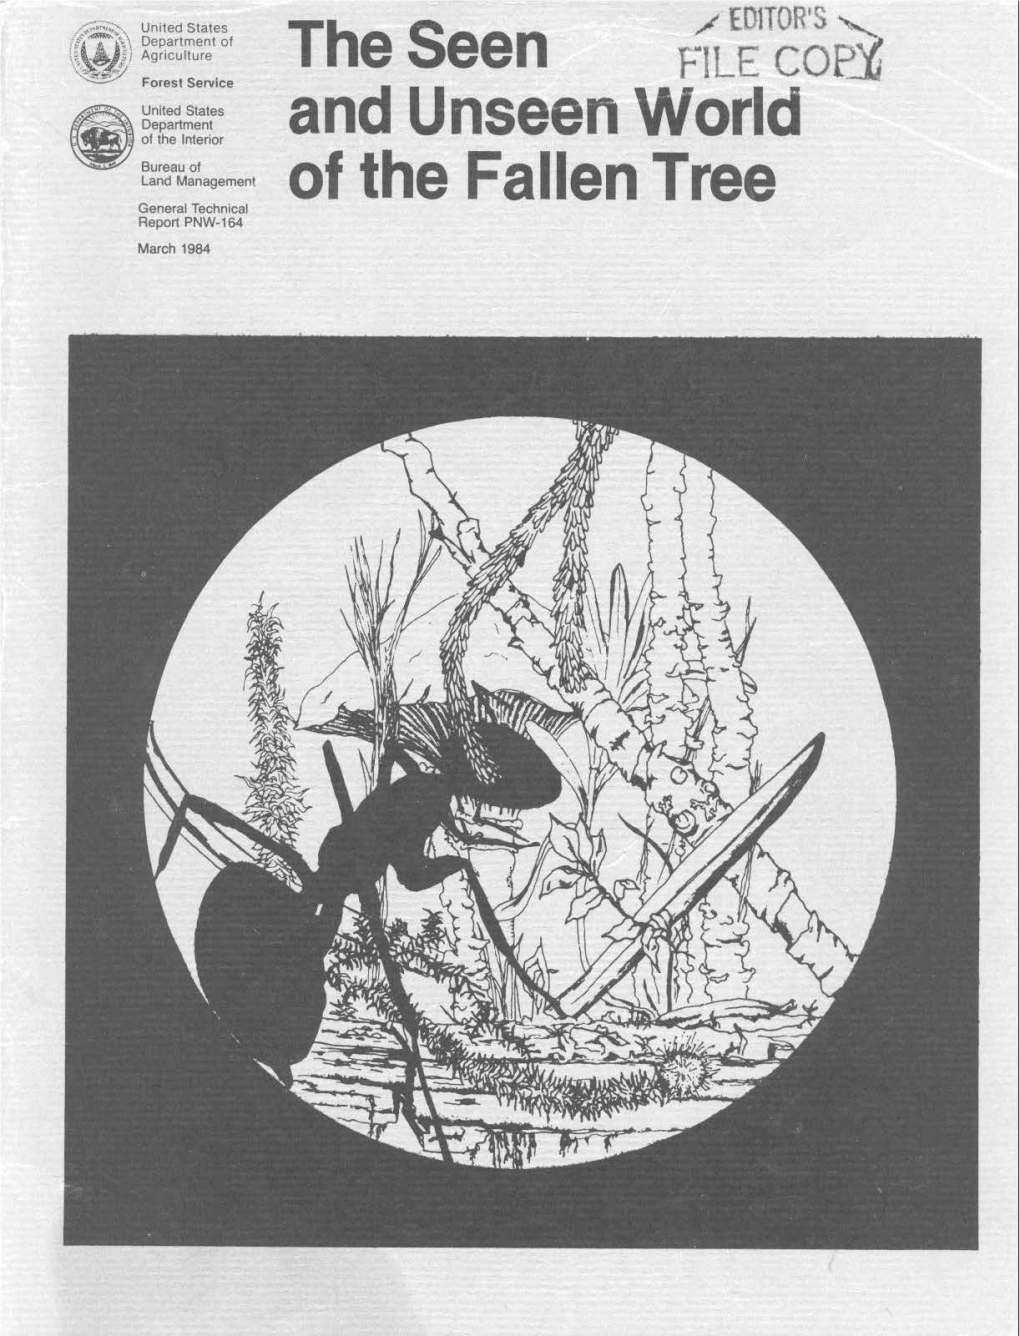 The Seen and Unseen World of the Fallen Tree